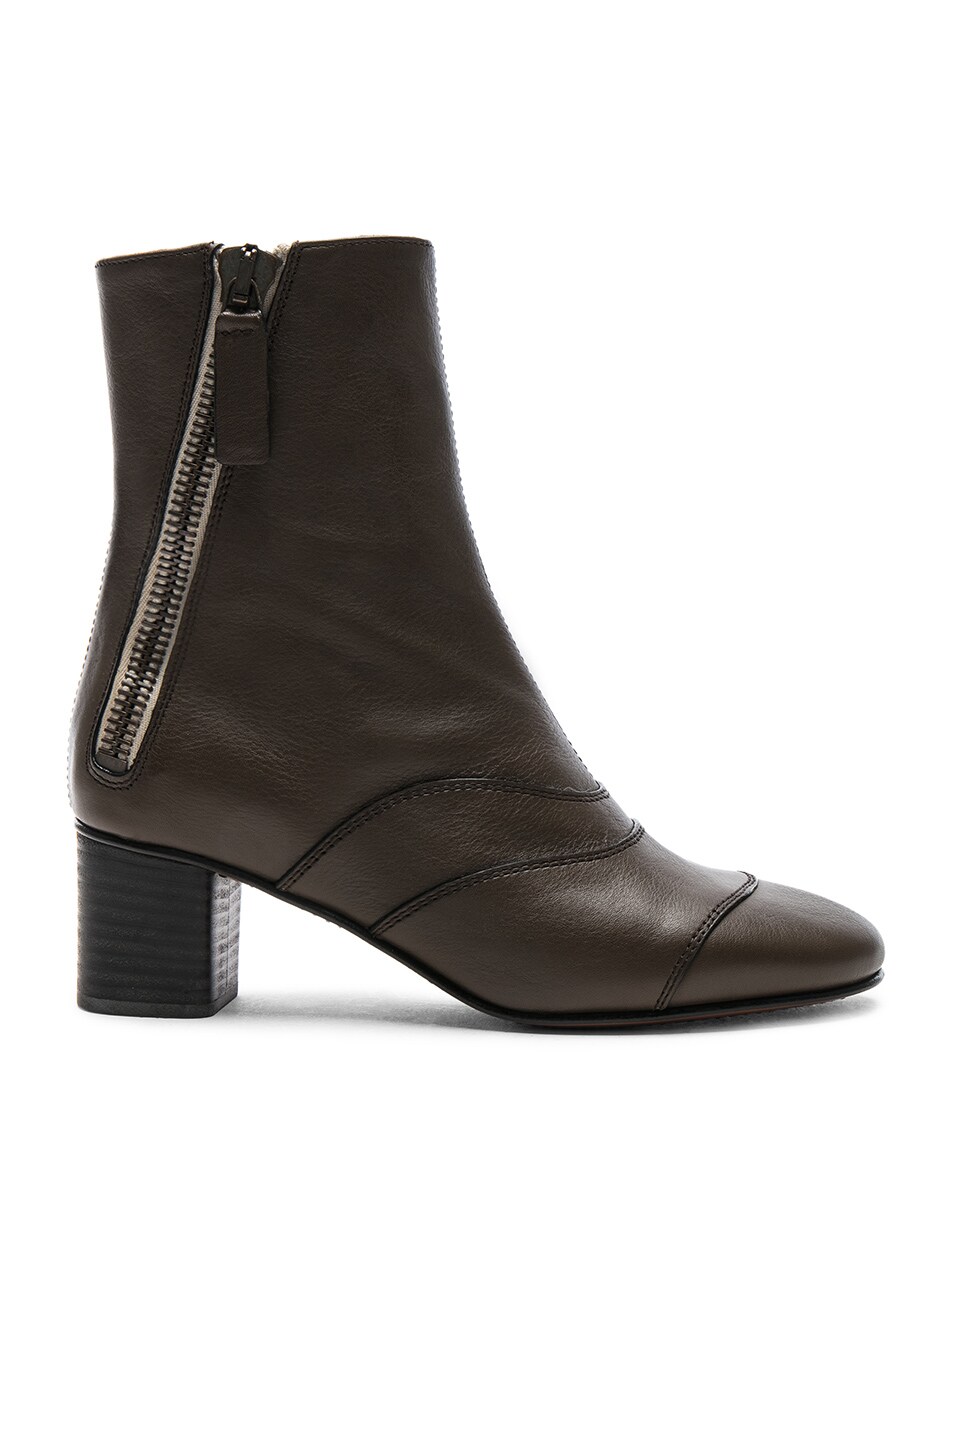 Image 1 of Chloe Leather Lexie Short Boots in Unclear Brown